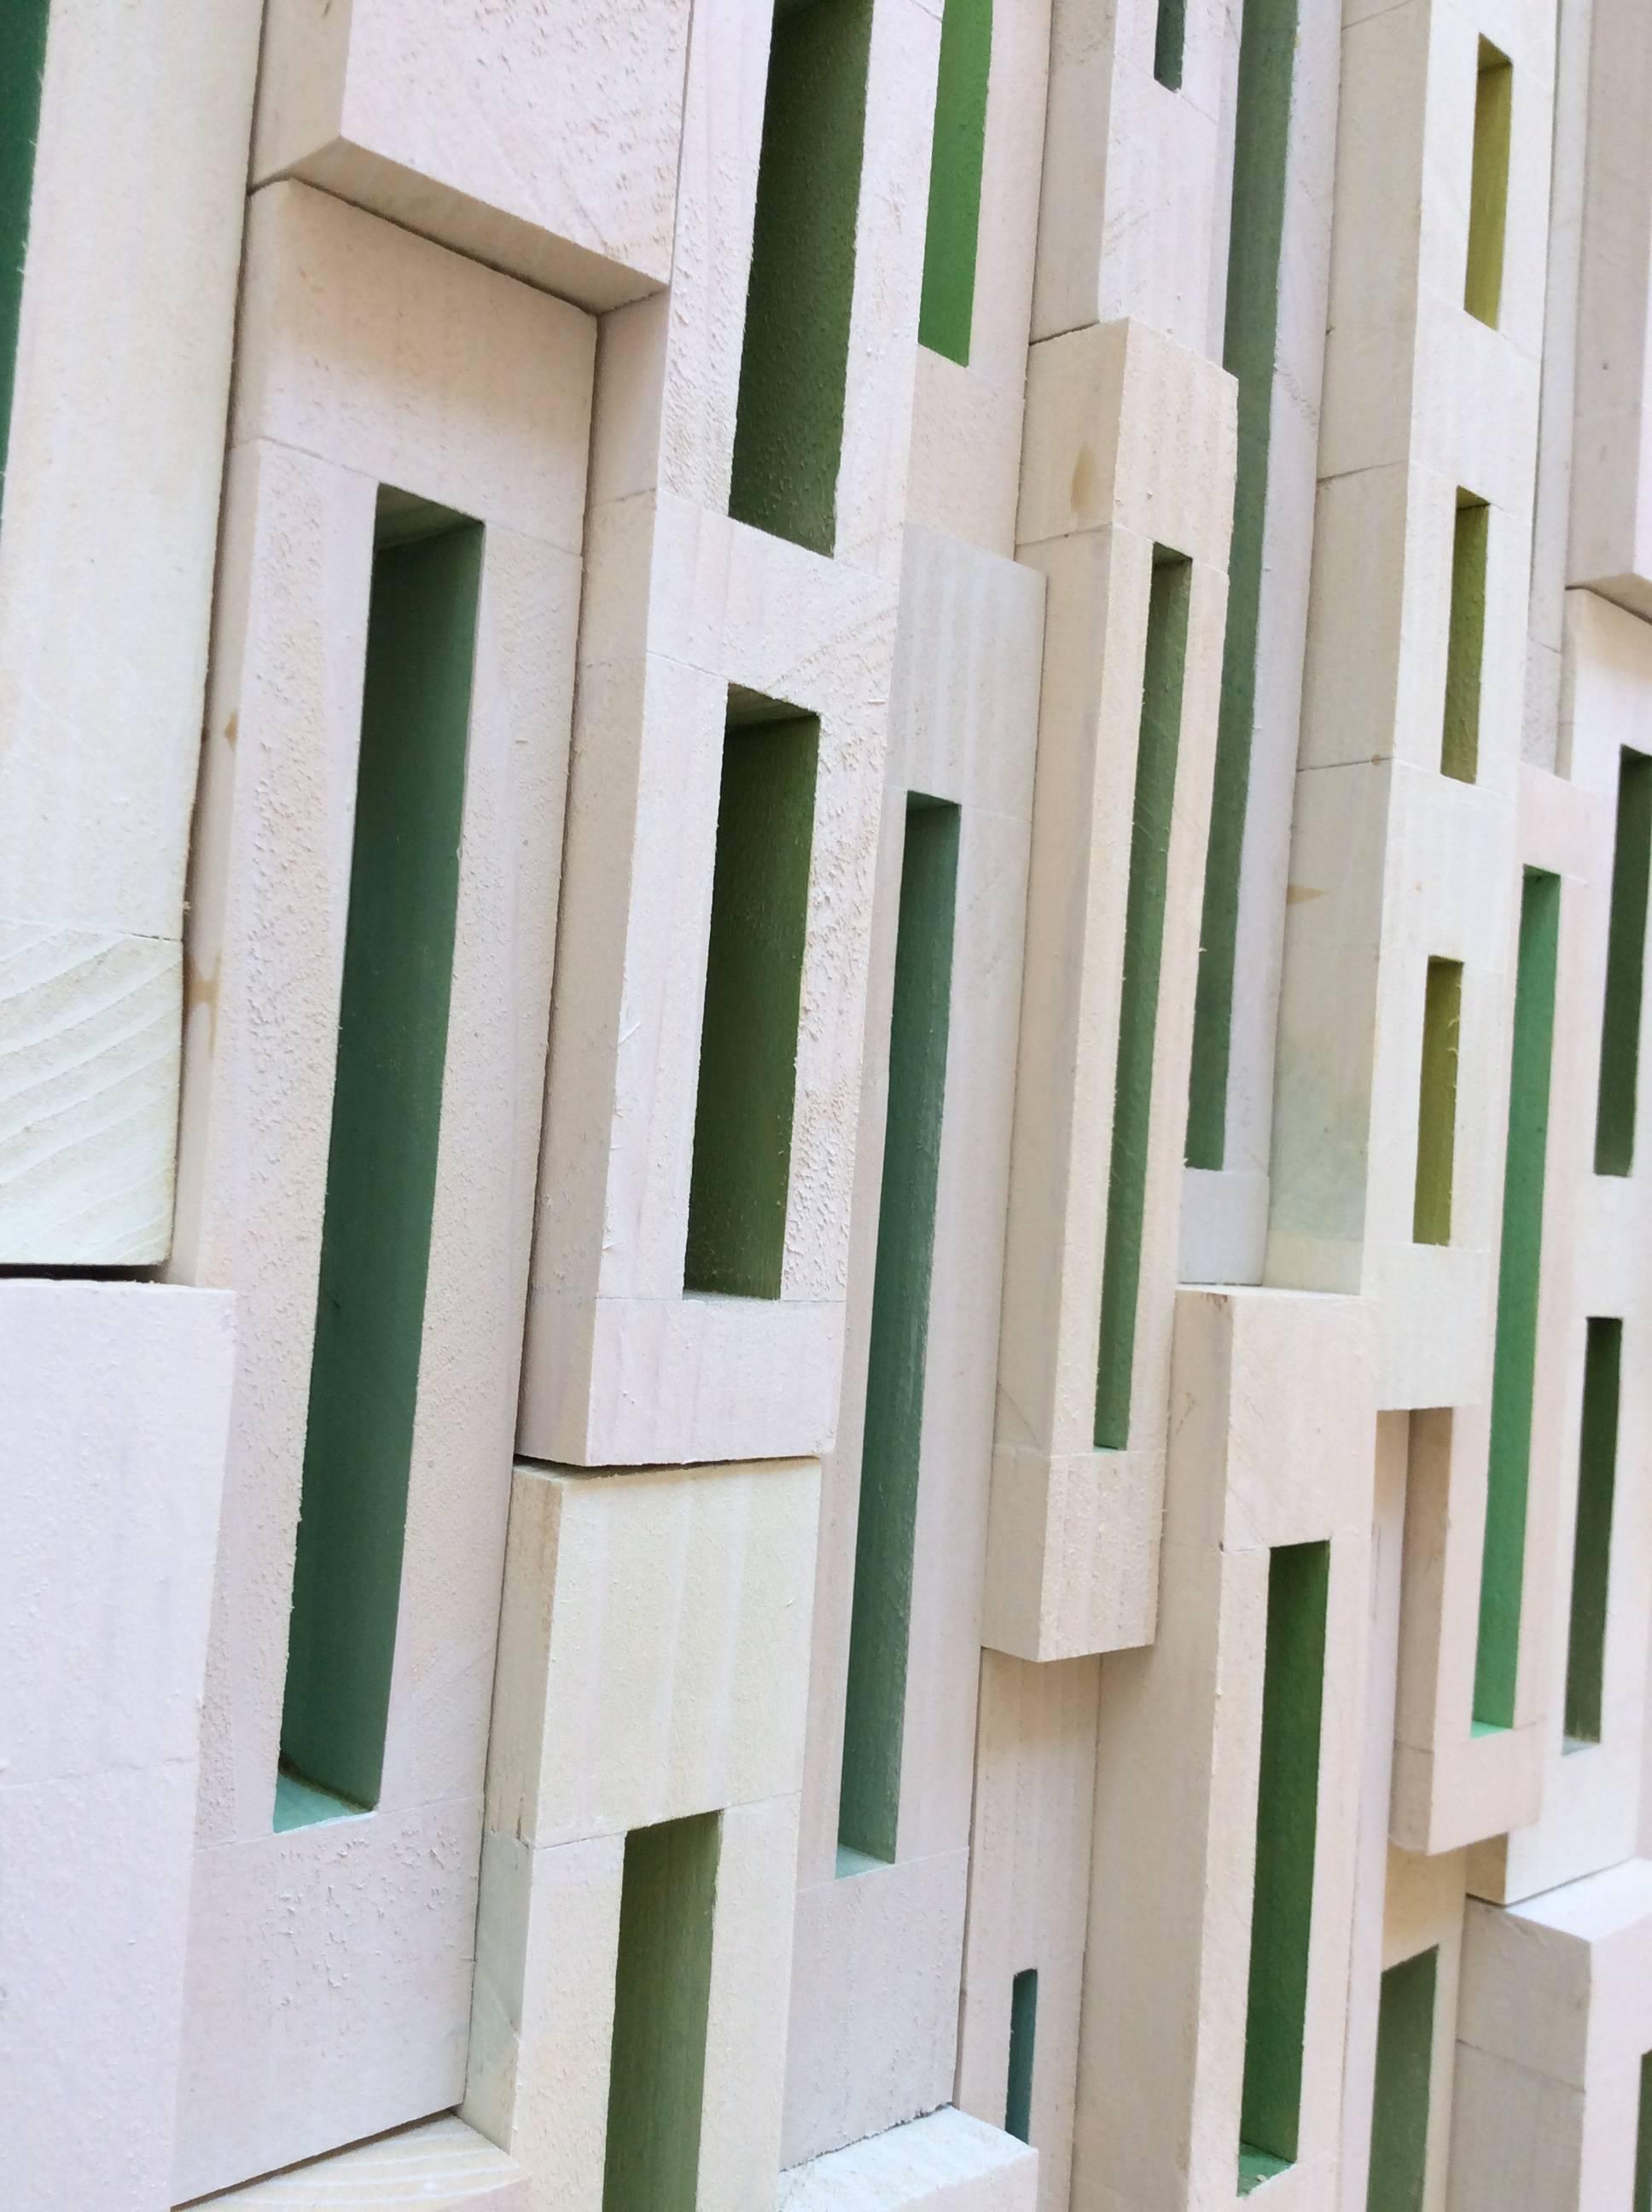 Glimpses (Abstract Mid-Century Modern 3-D Wall Sculpture in Green & White) 2